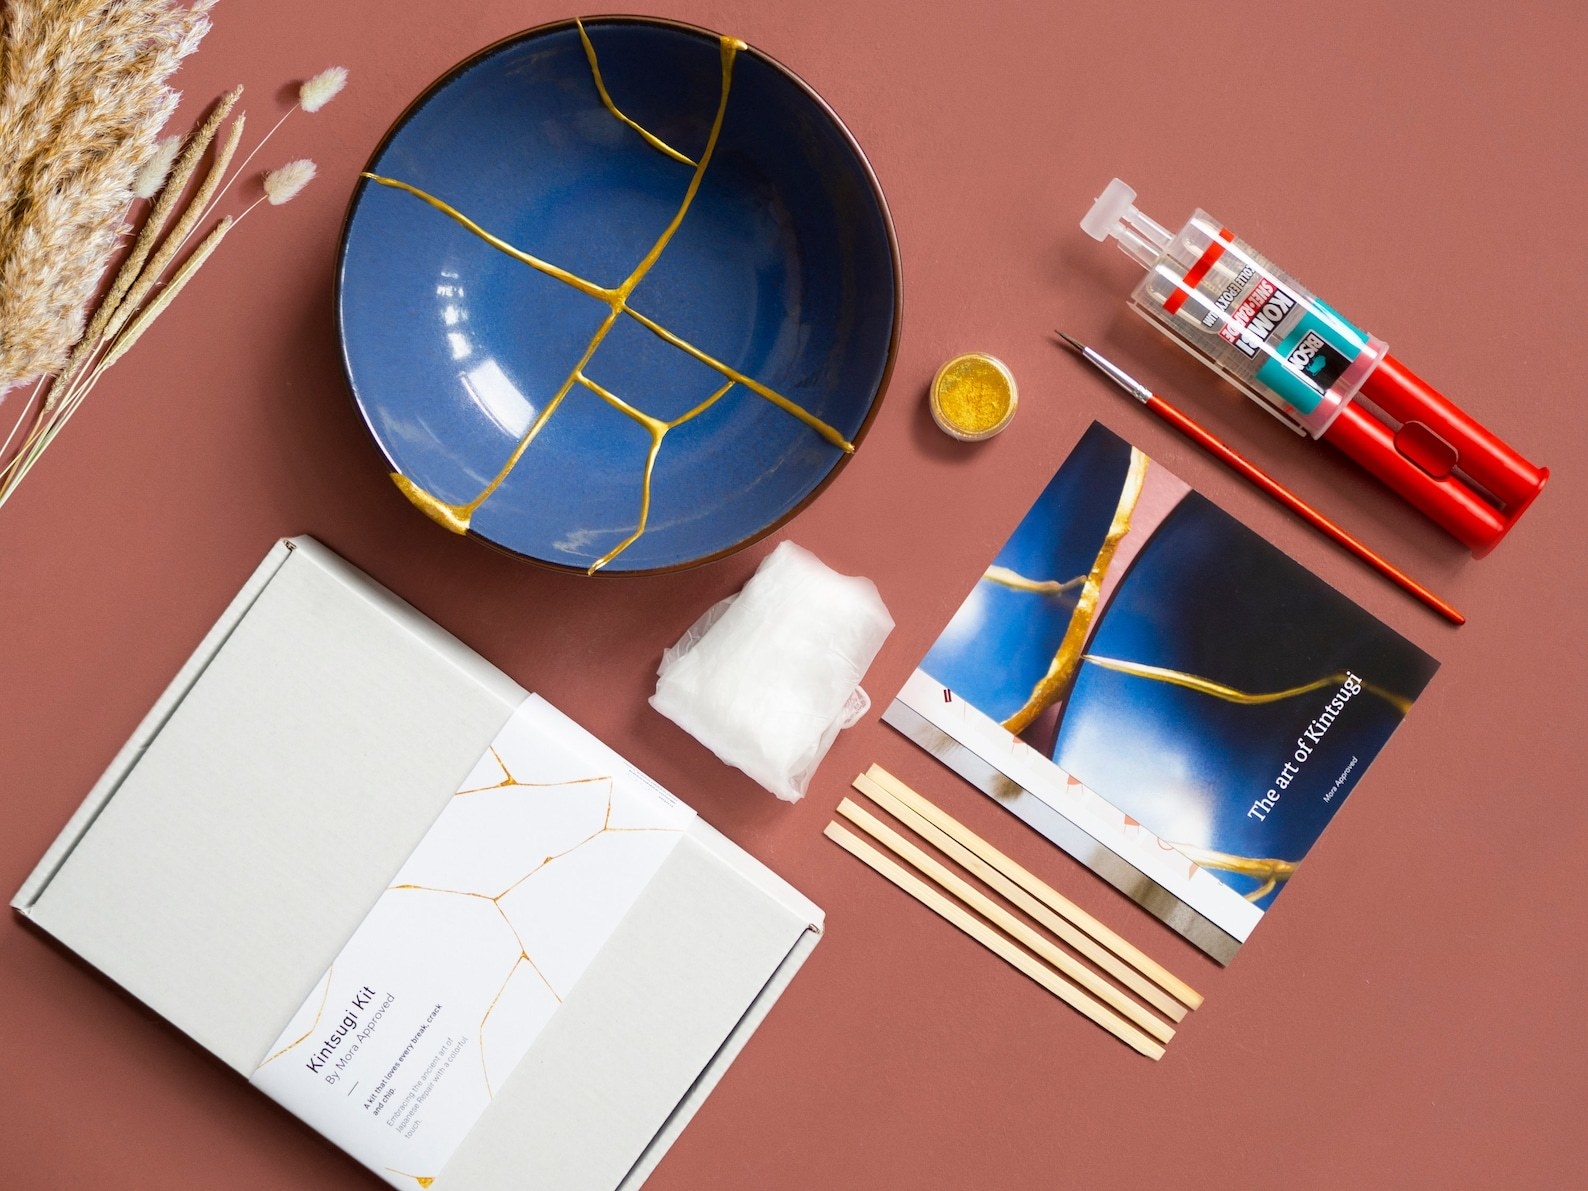 the kitsungi kit with paint, brushes, and other tools